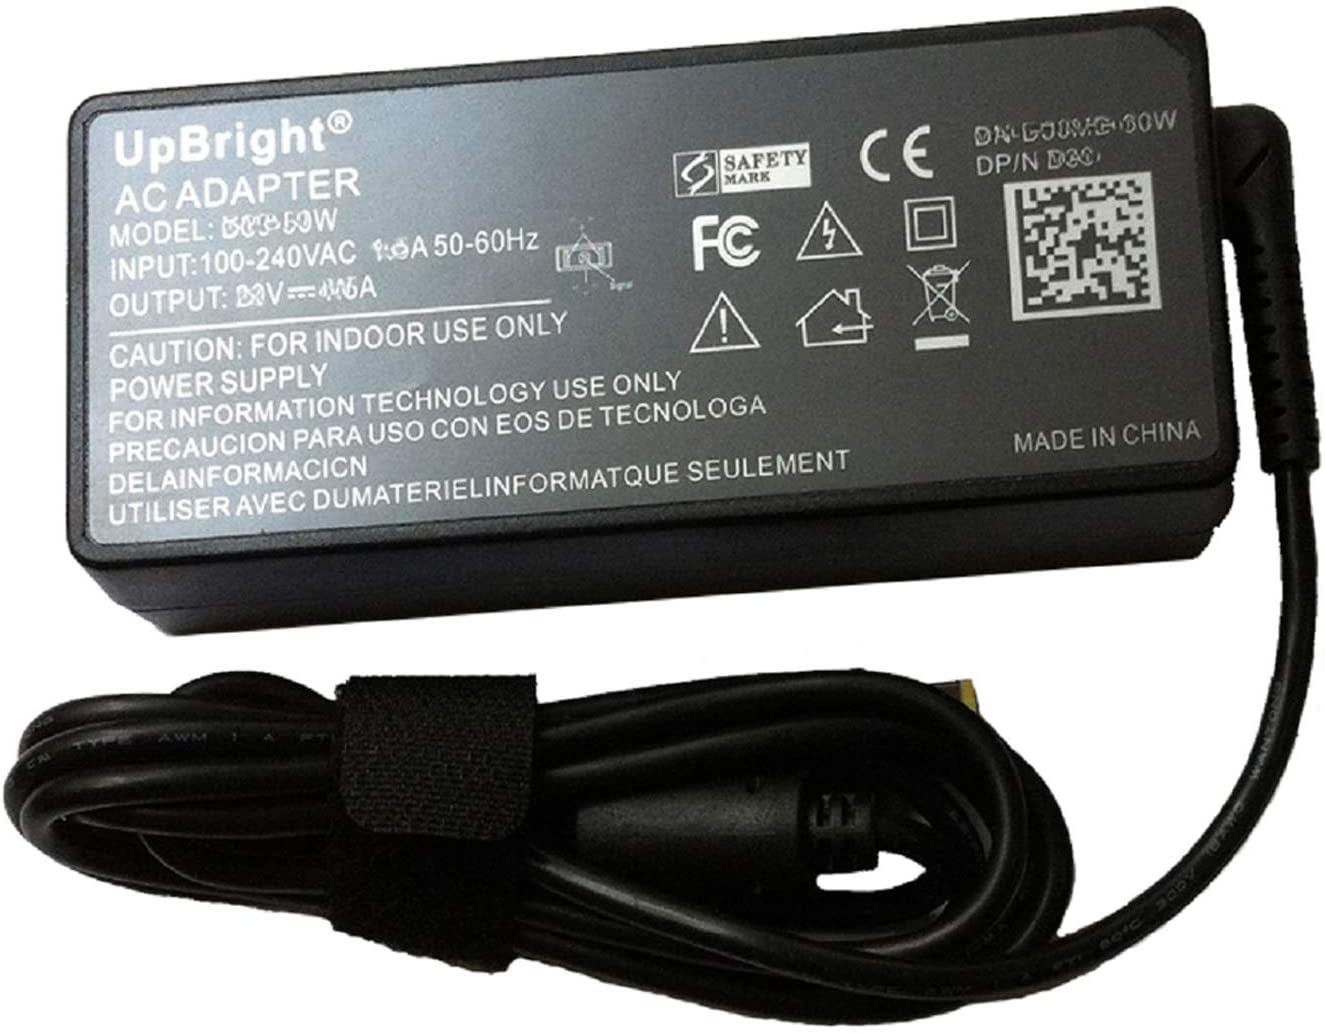 UPBRIGHT NEW AC/DC Adapter For Lenovo P/N 4X20E53337 4X20E53338 4X20E53339 4X20E53340 4X20E53341 4X20E53342 4X20E53343 4X20E53344 4X20E53345 Power Supply Cord Cable PS Charger Mains PSU - image 2 of 5